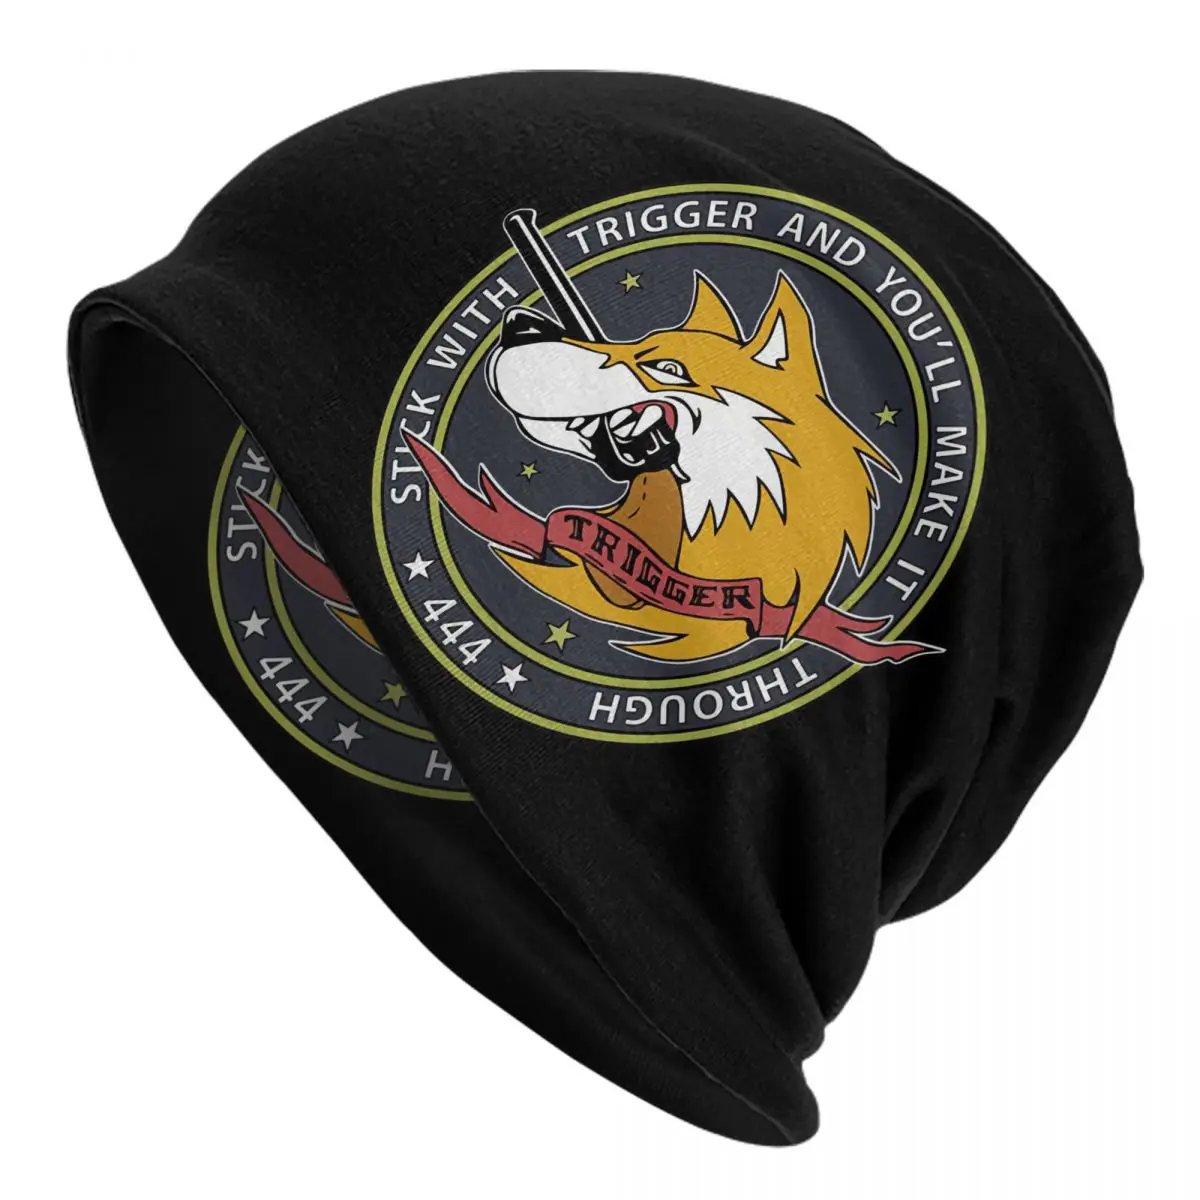 Ace Combat Trigger Badge Adult Men's Women's Knit Hat Keep warm winter knitted hat